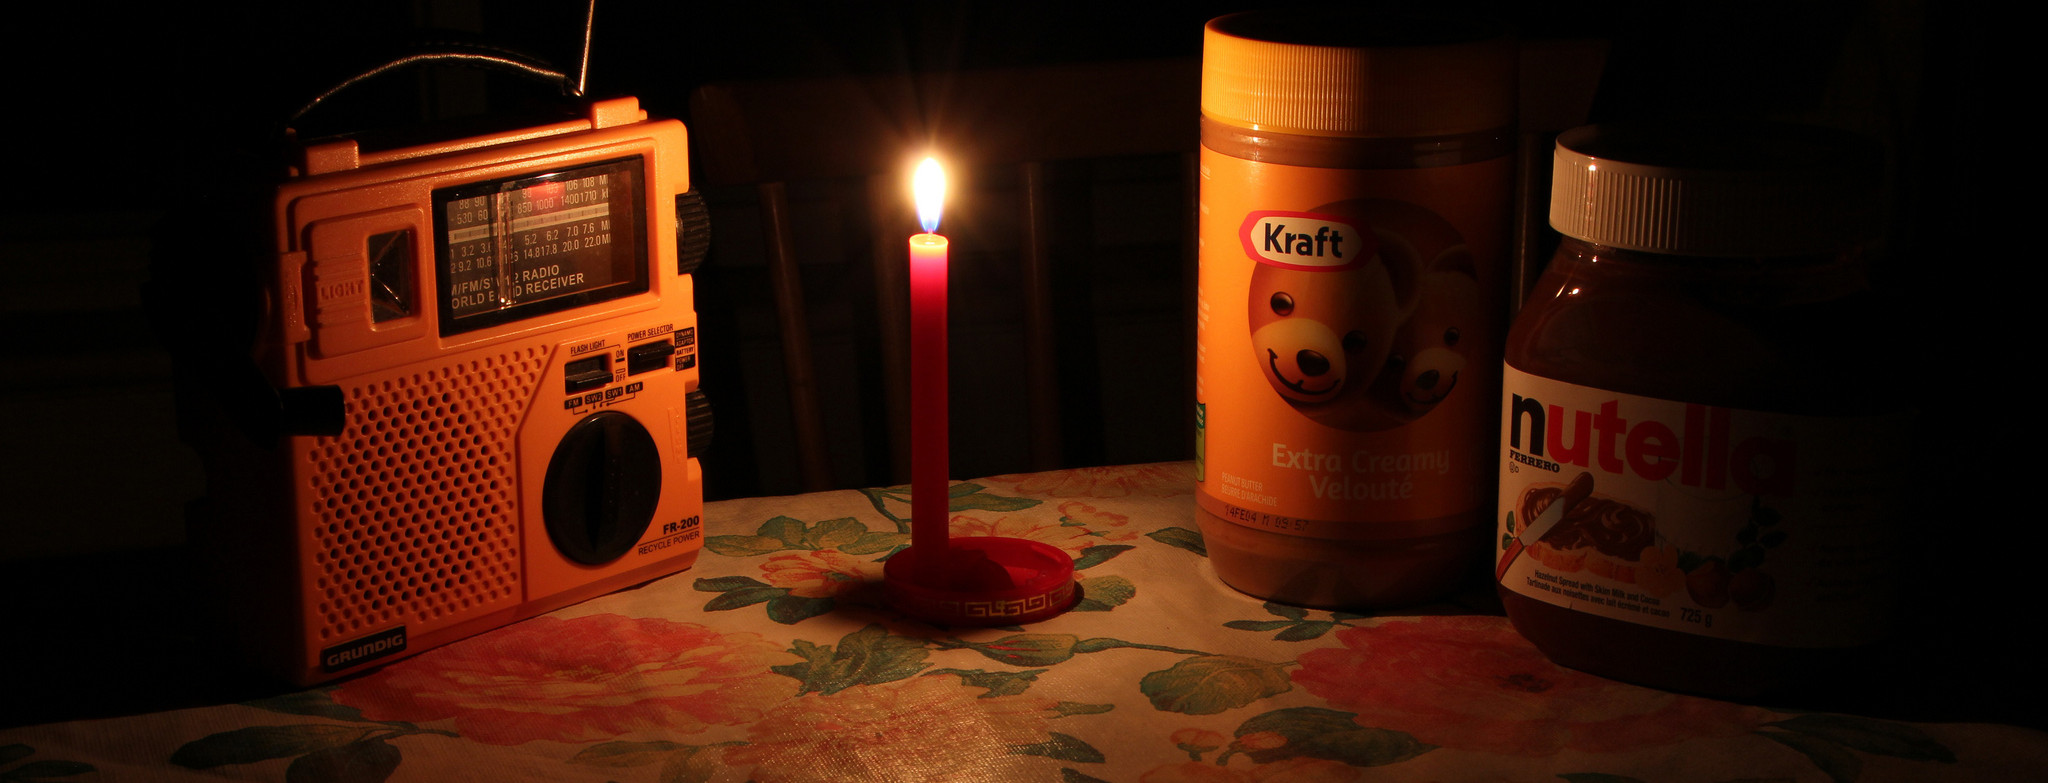 8 Items You Need To Survive A Grid Failure Or Power Outage! 